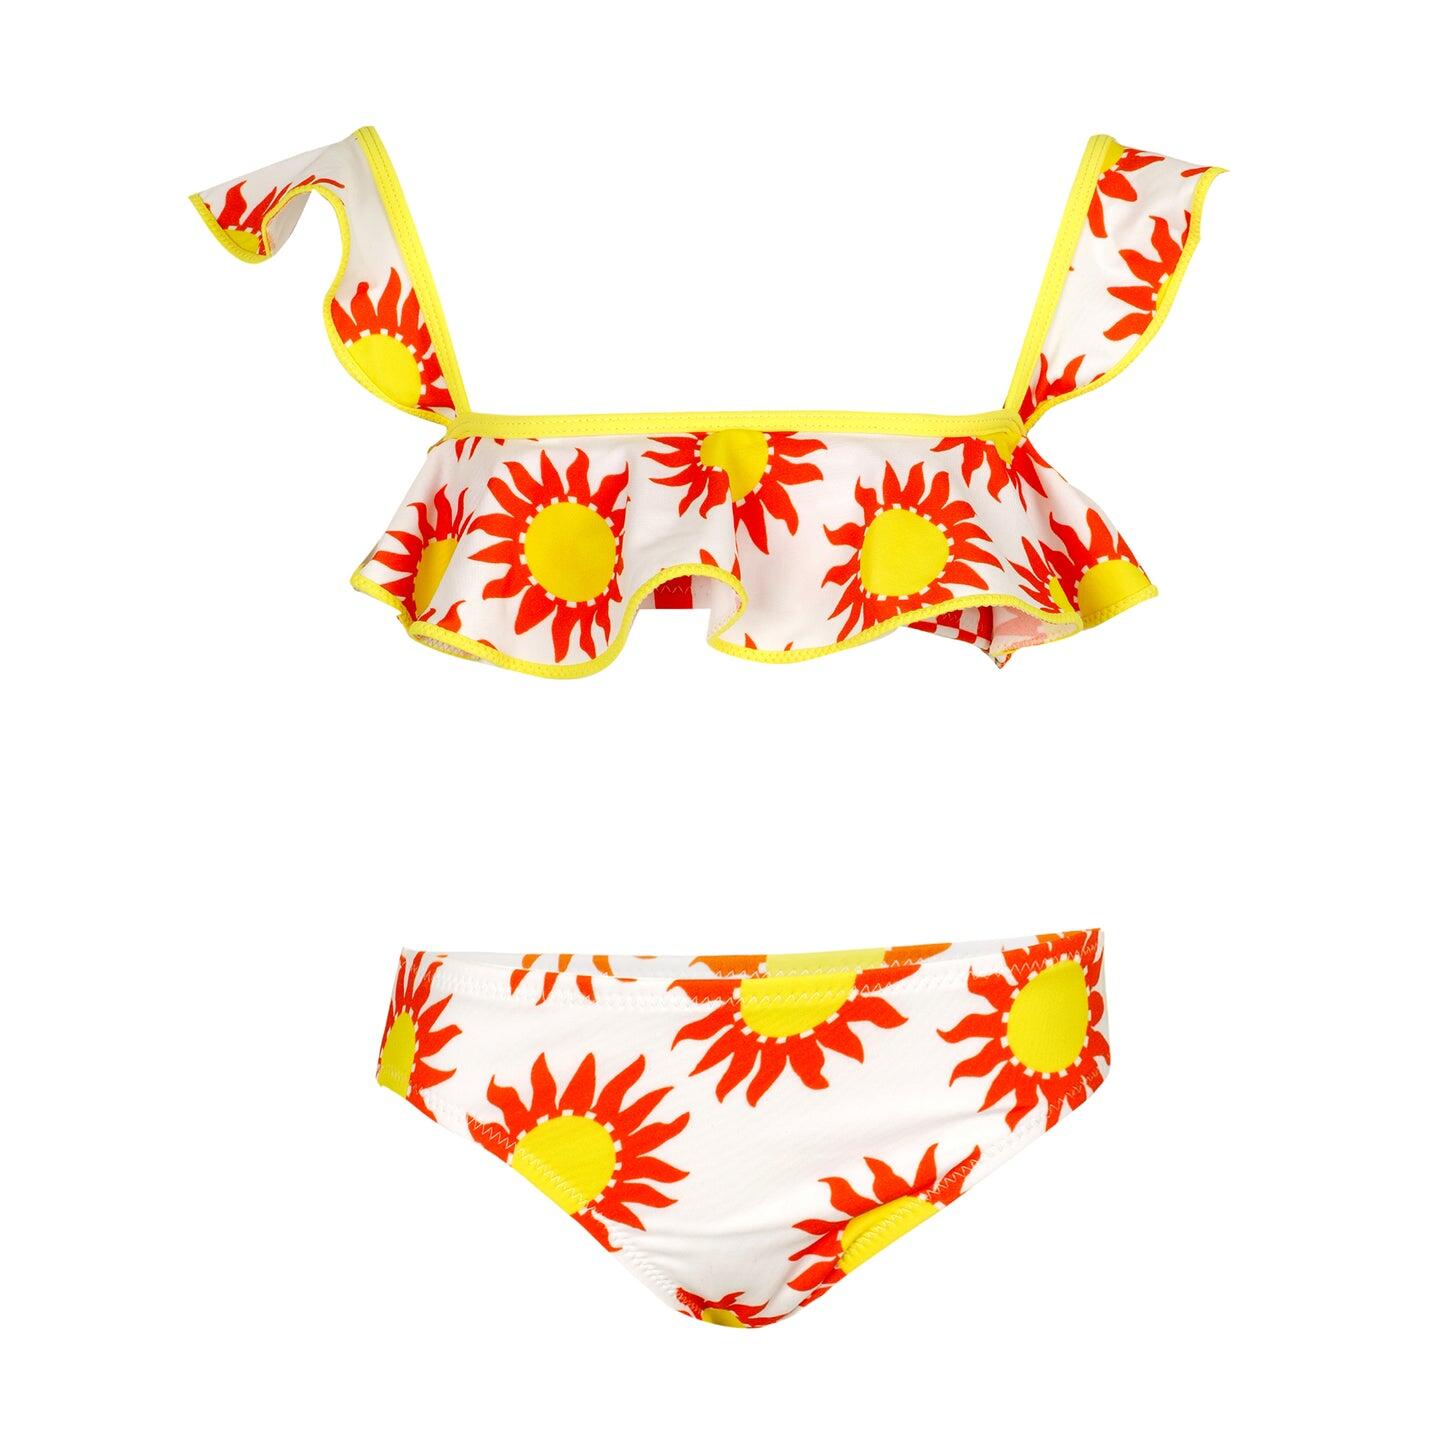 Load image into Gallery viewer, Ruffle Bikini for Kids in Red/Yellow Floral Print
